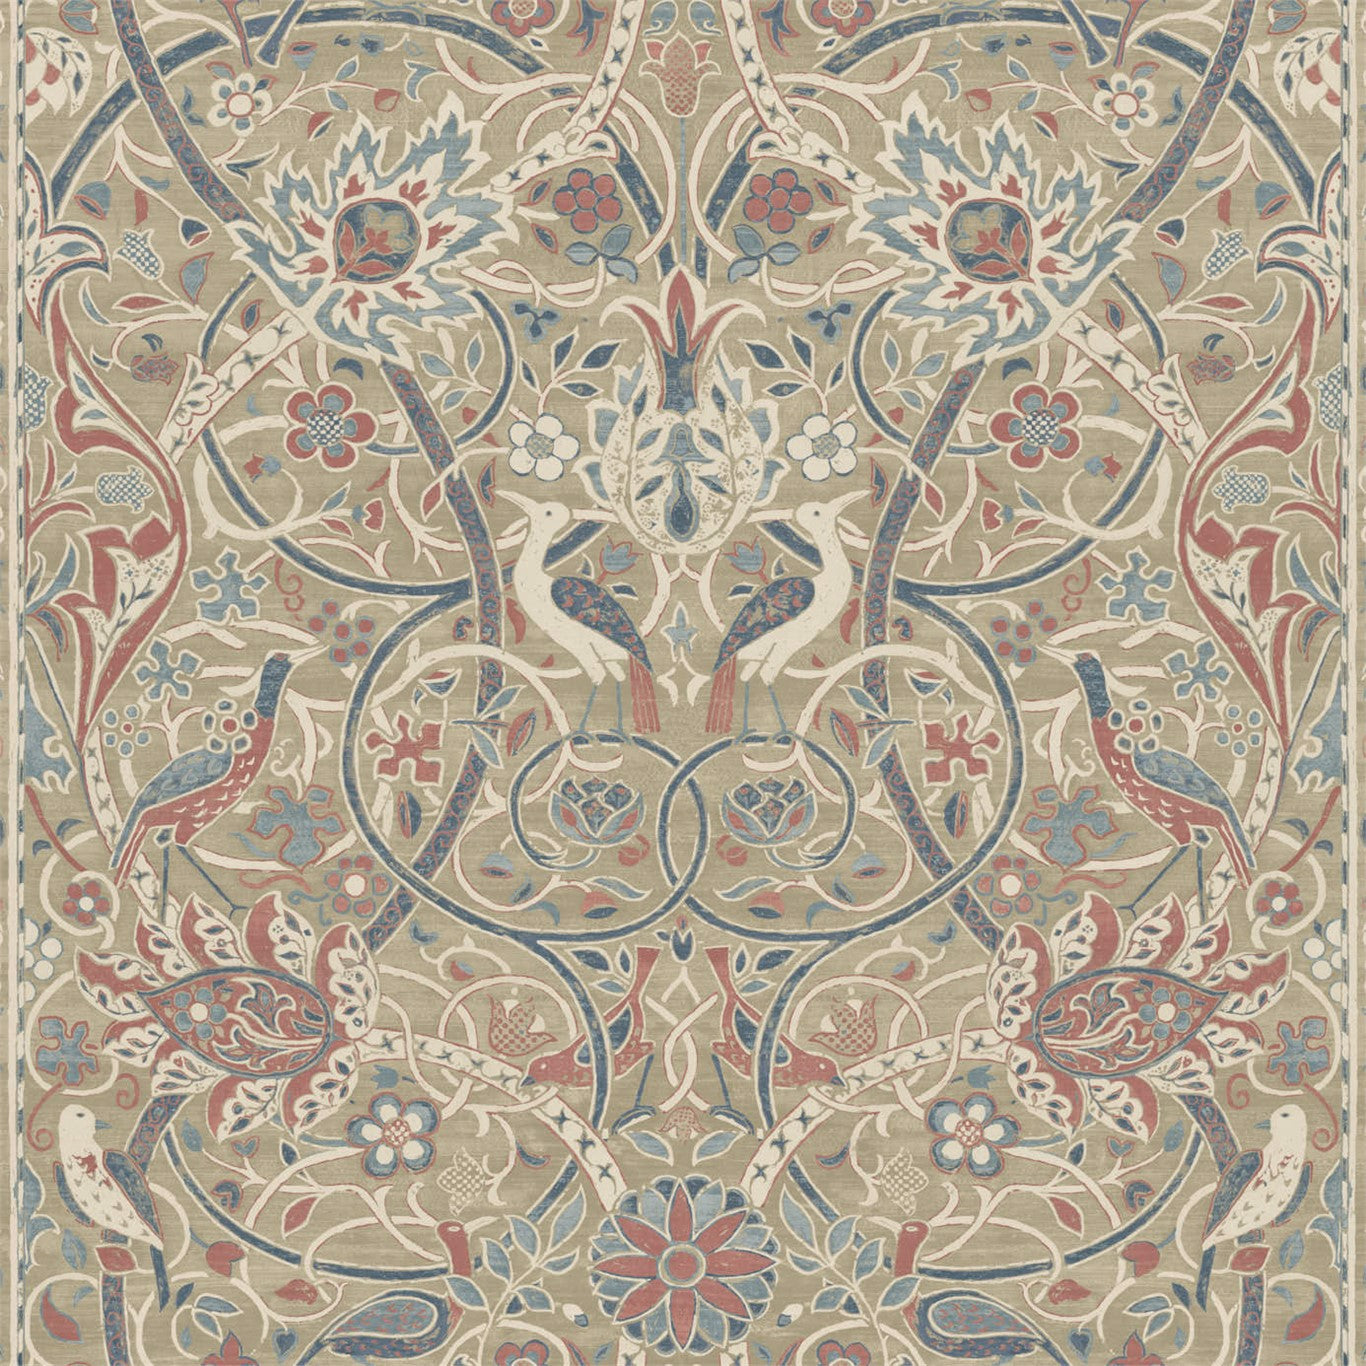 Bullerswood Spice/Manilla Wallpaper DMA4216446 by Morris & Co